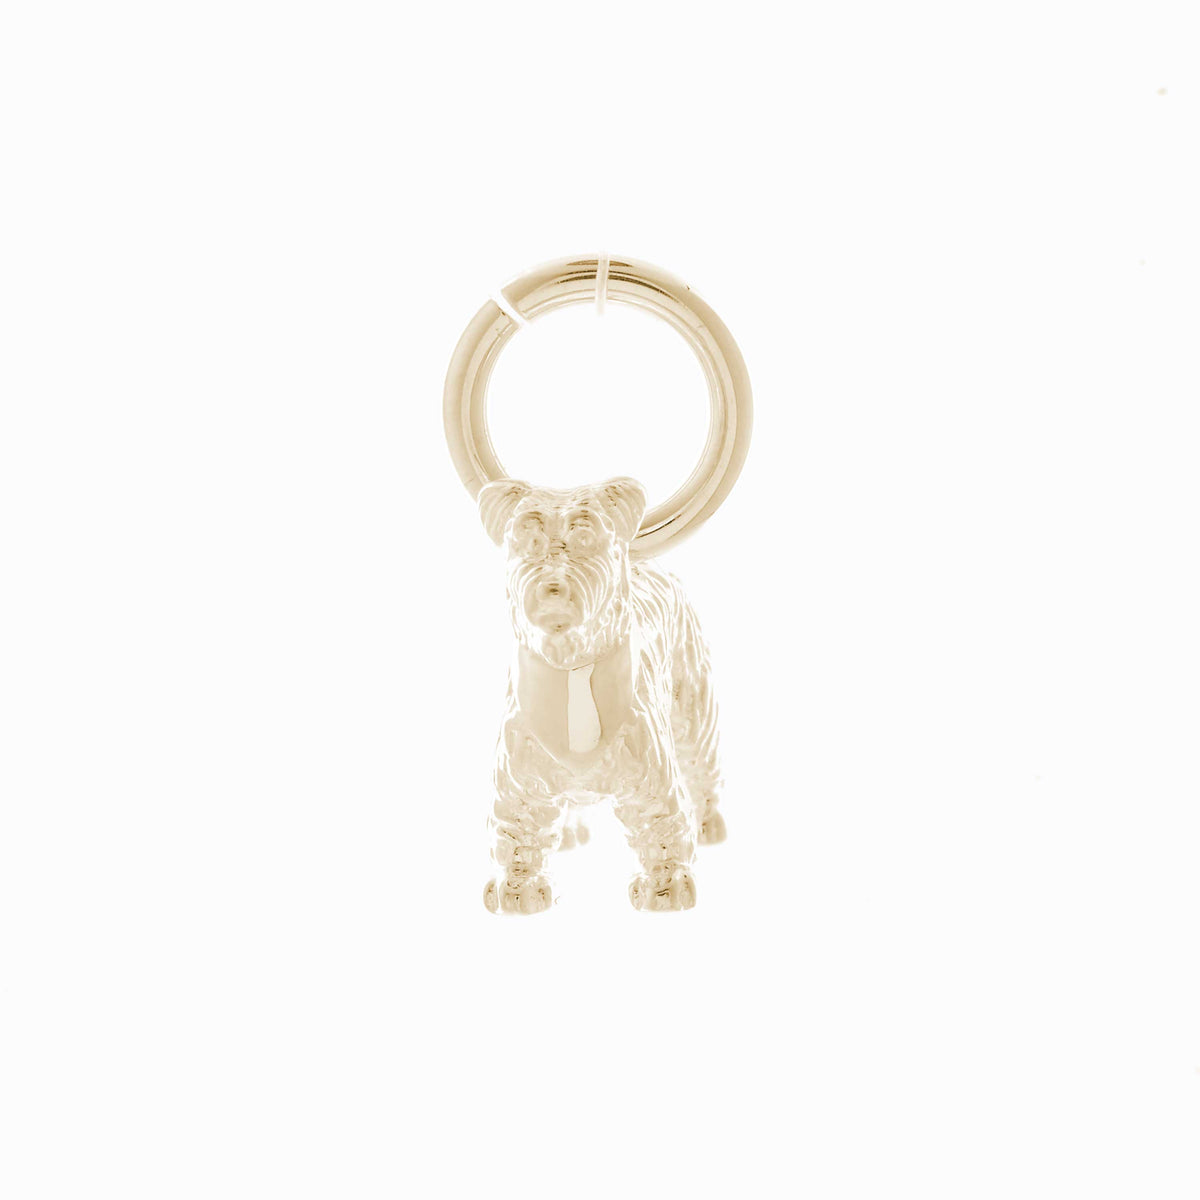 Solid 9ct gold Miniature Schnauzer charm with tiny bandana (optional), perfect for a charm bracelet or necklace.